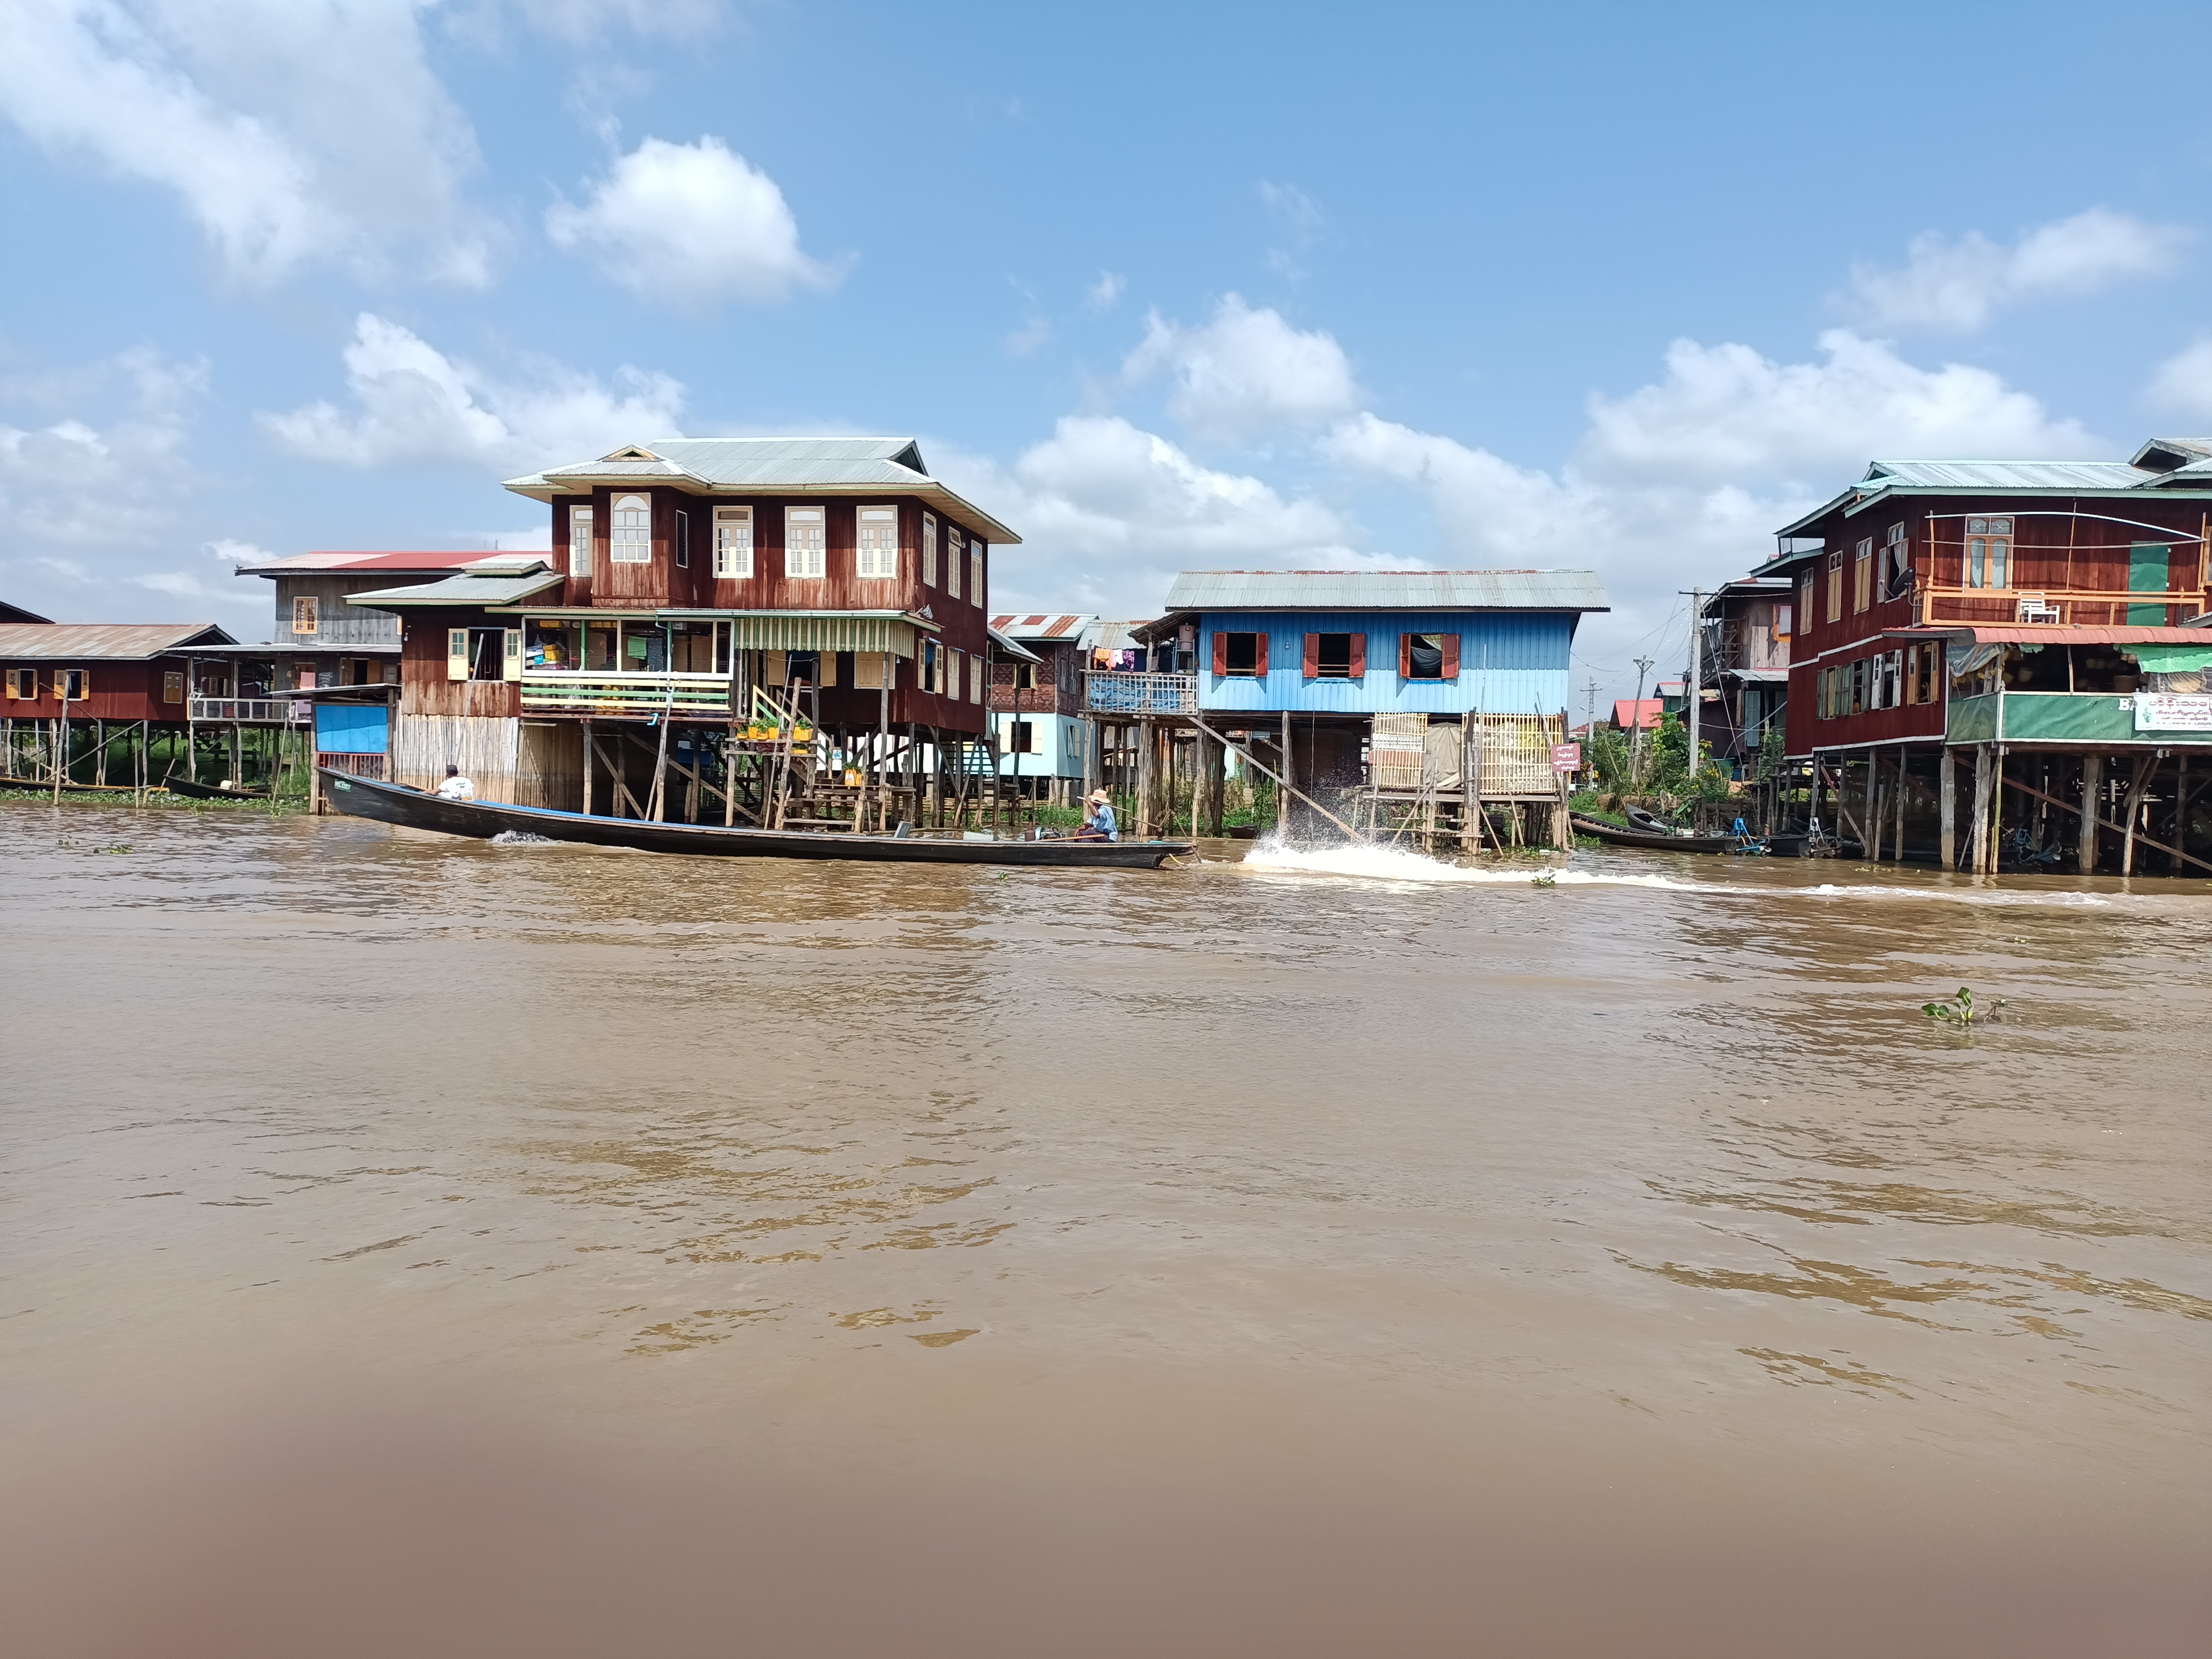 WorldFish is working with the Inle Lake Committee on conservation efforts at the lake, combating illegal fishing and cleaning plastic bags and other rubbish that end up in the lake. Photo by Nang Tin May Win. 